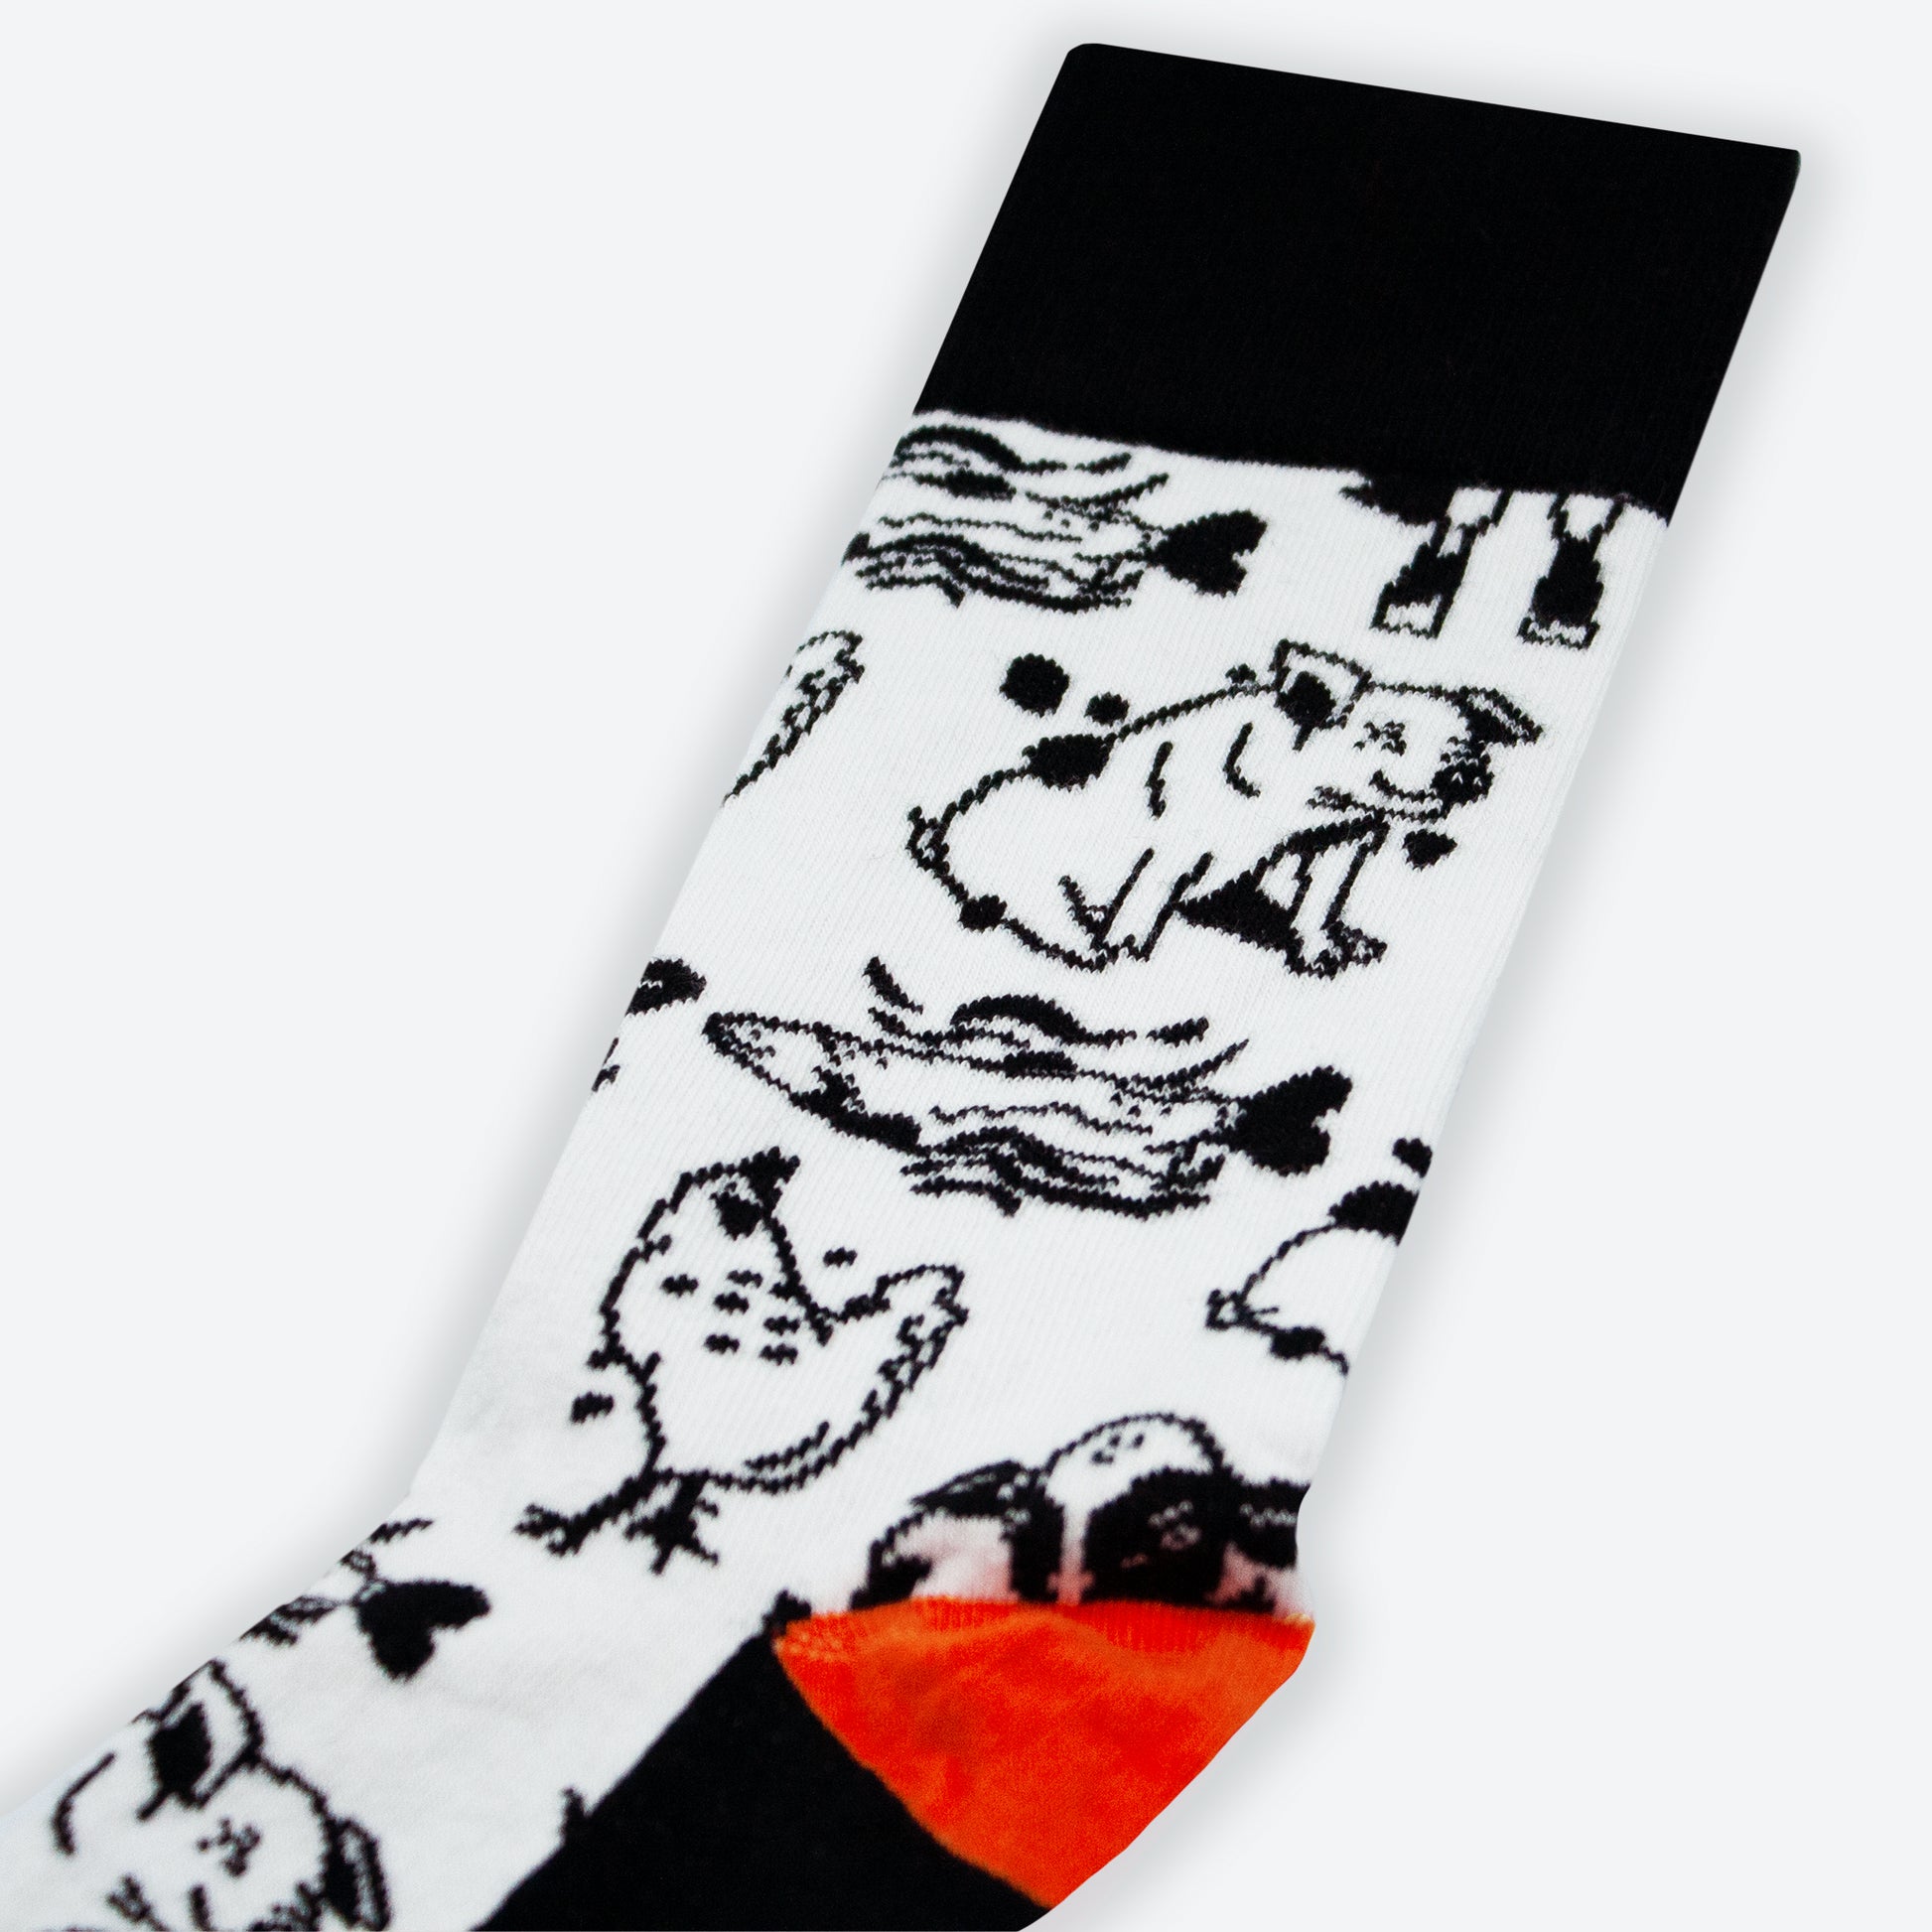 Close up image of one sock showing detailed animal illustrations